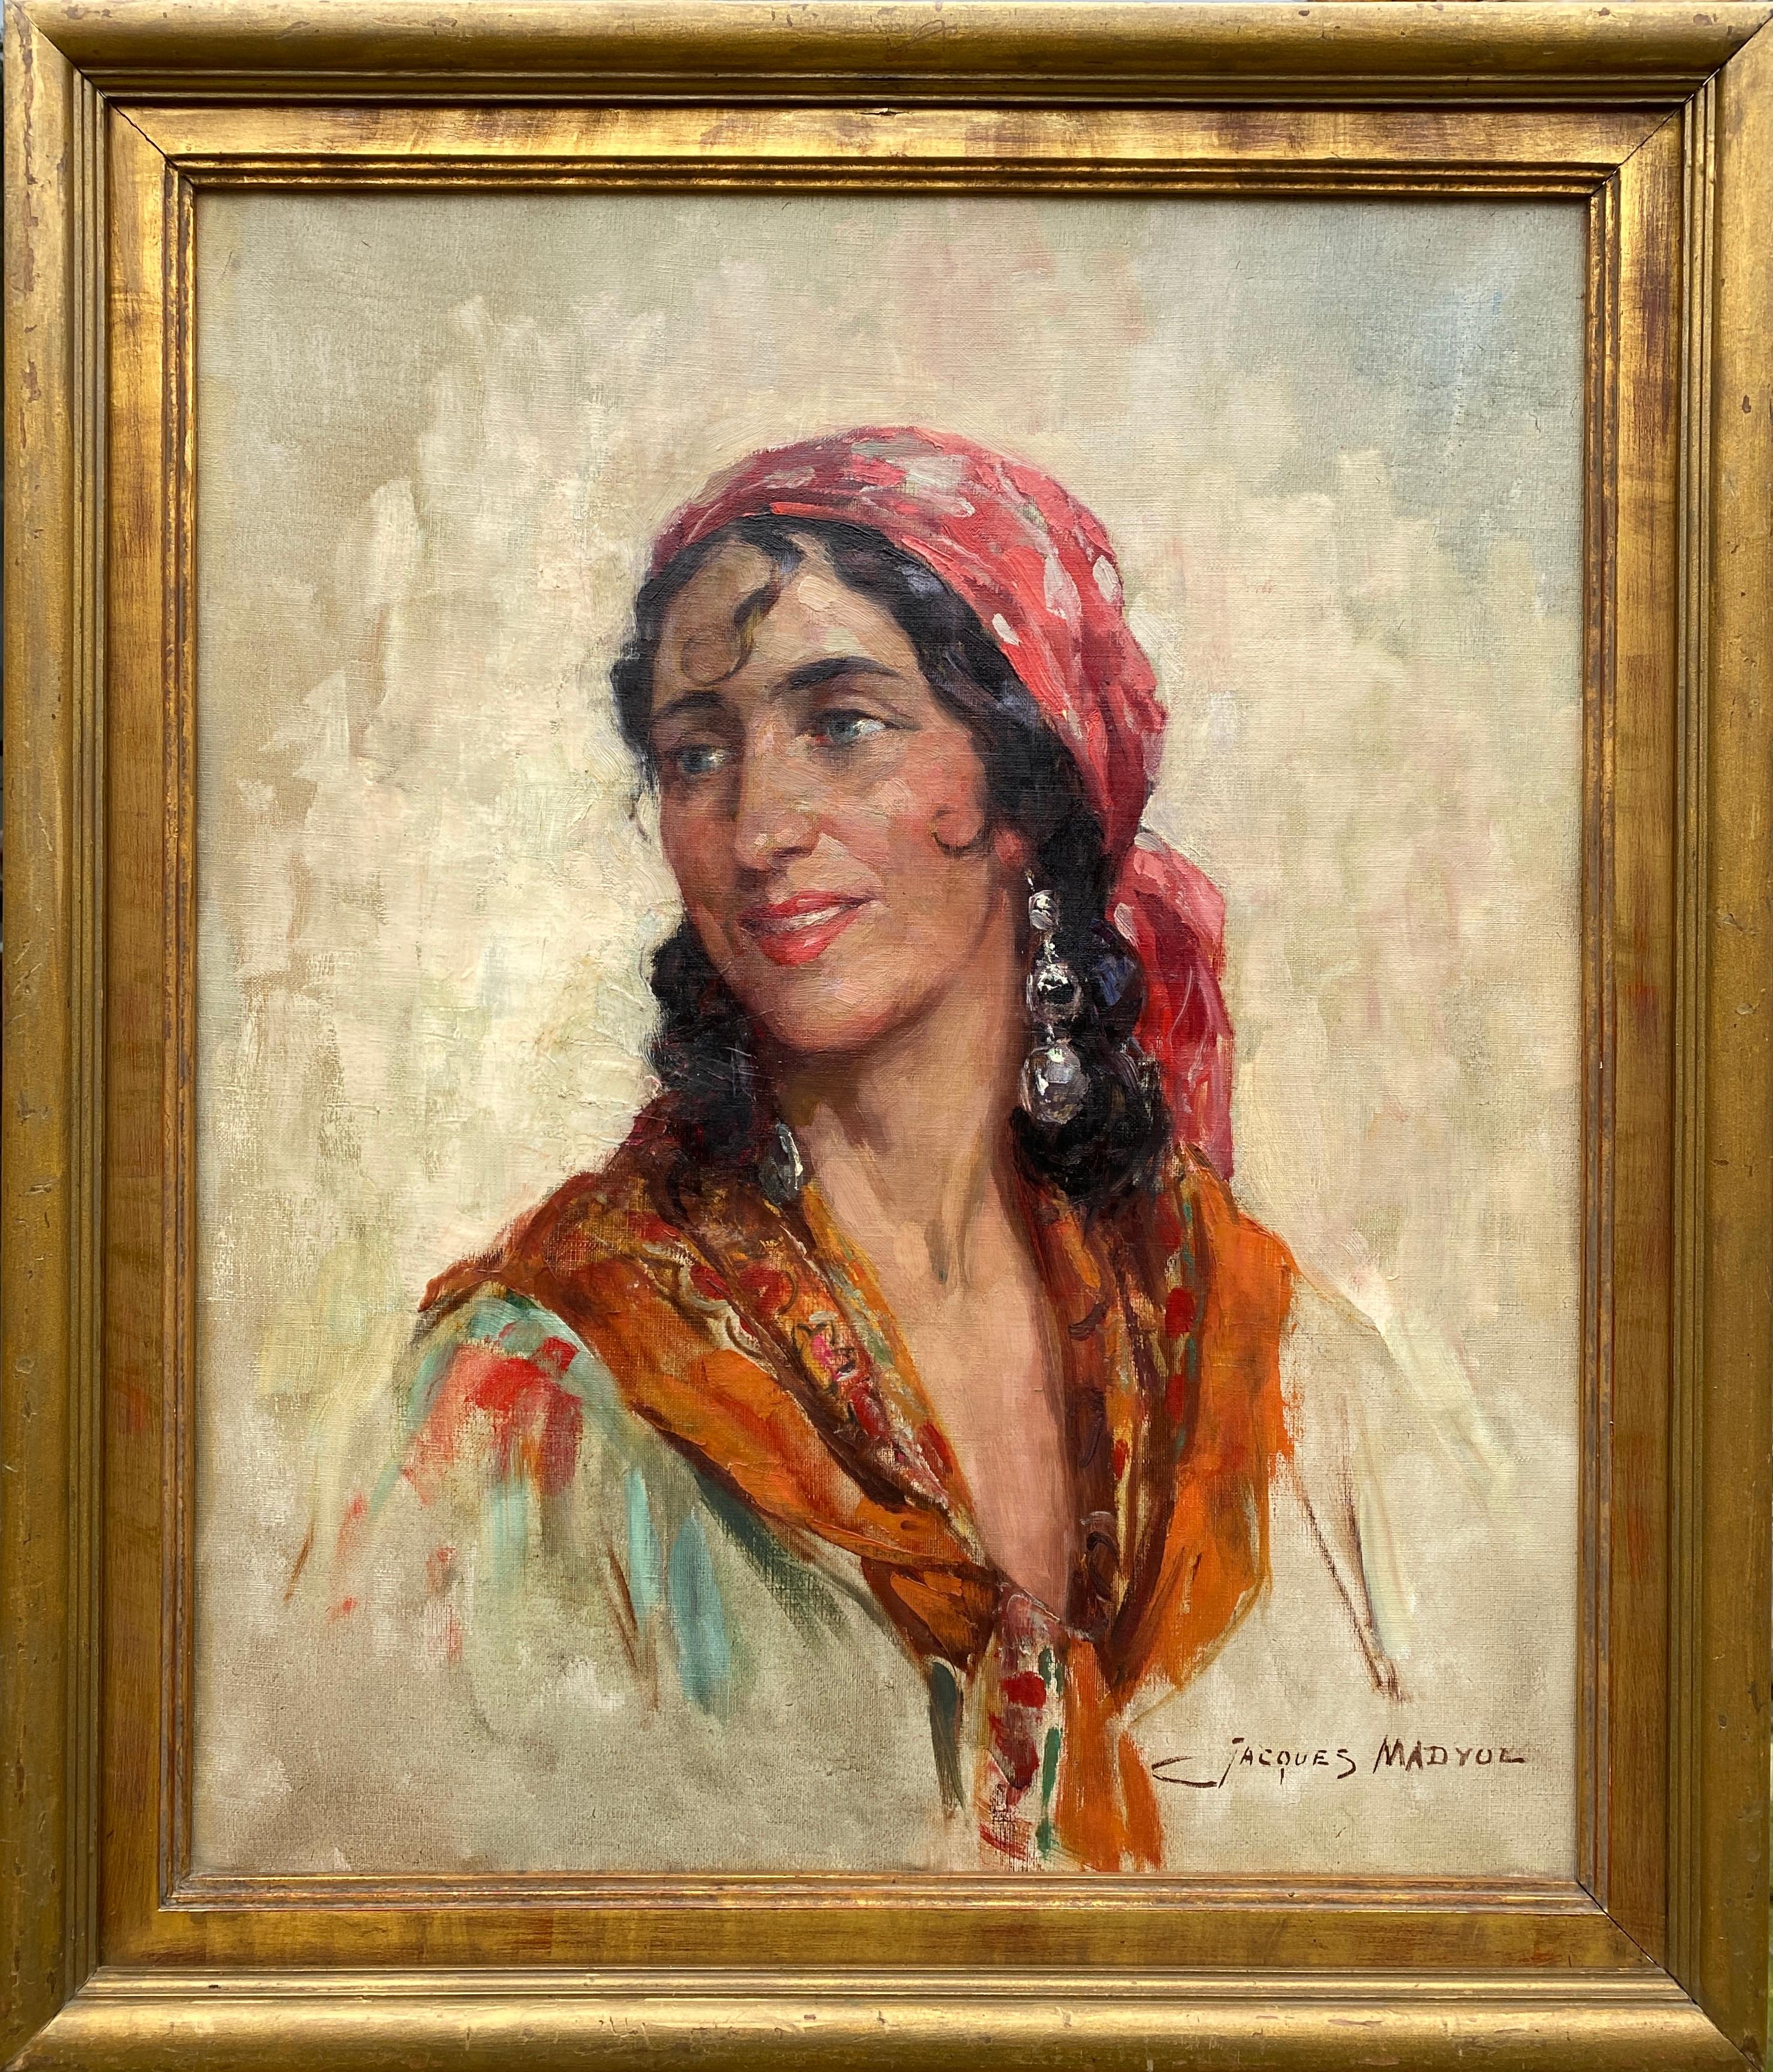 Jacques Madyol, Brussels 1871 – 1950, Belgian Painter, A Gypsy Lady